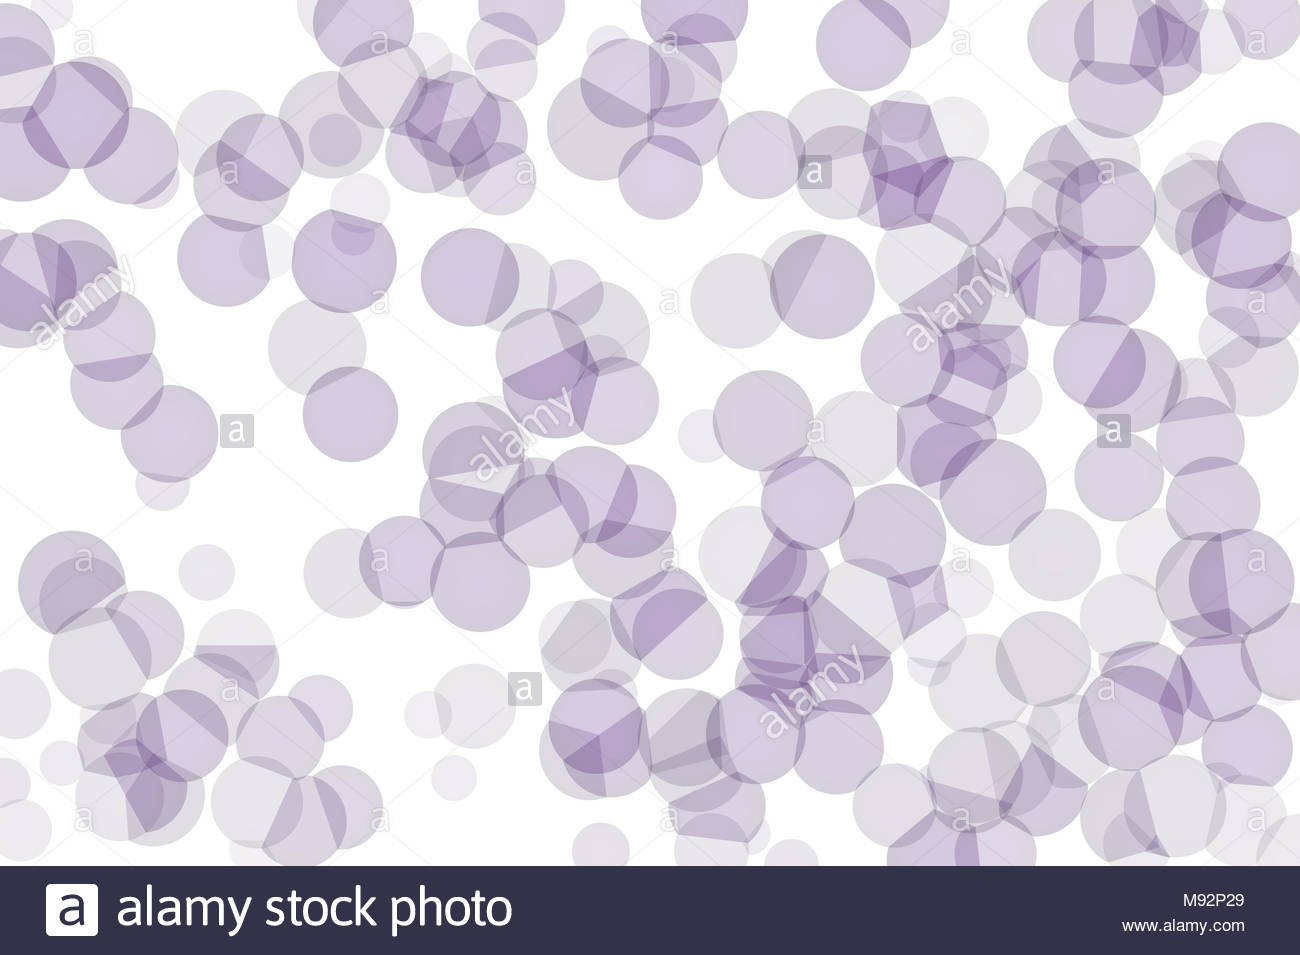 random-colored-abstract-overlapping-circles-bubbles-or-ellipses-digital-generative-art-for-design-texture-background-M92P29.jpg